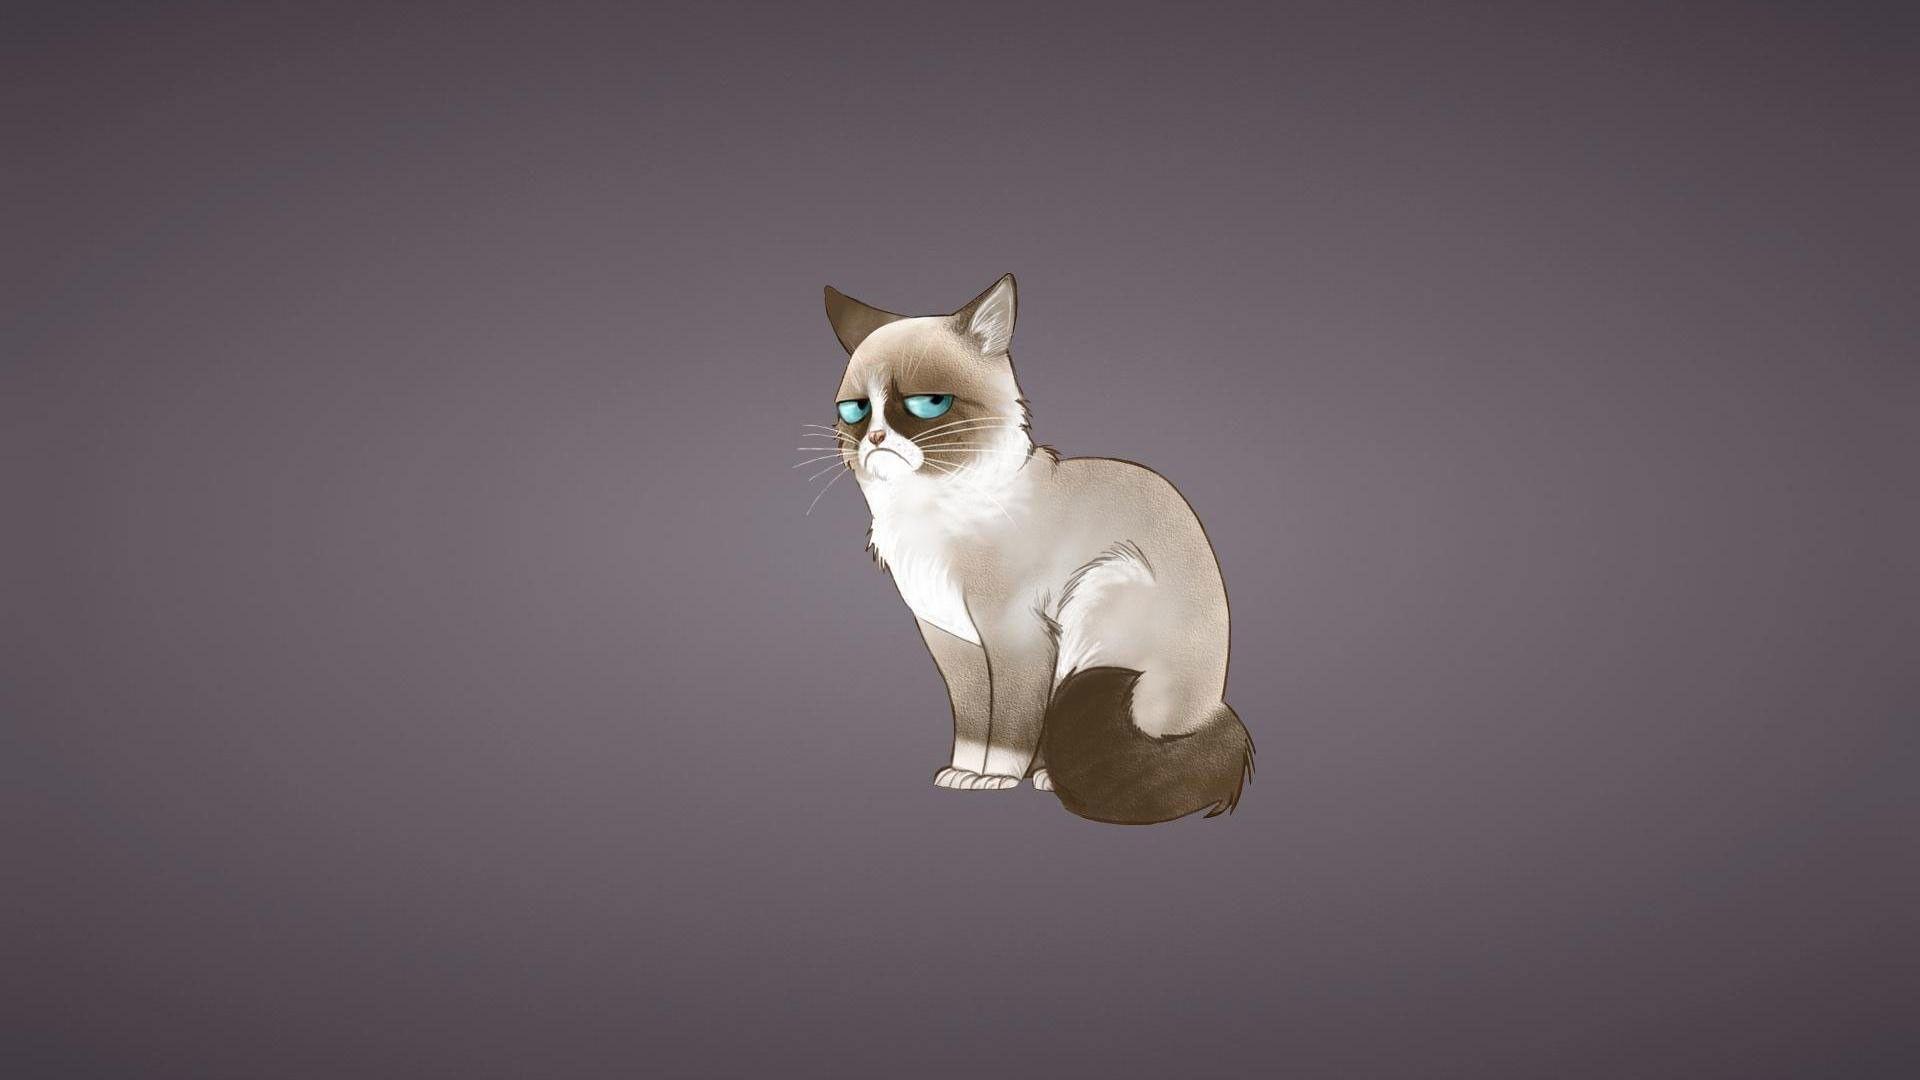  Animated  Cat  Desktop Wallpapers  Top Free Animated  Cat  